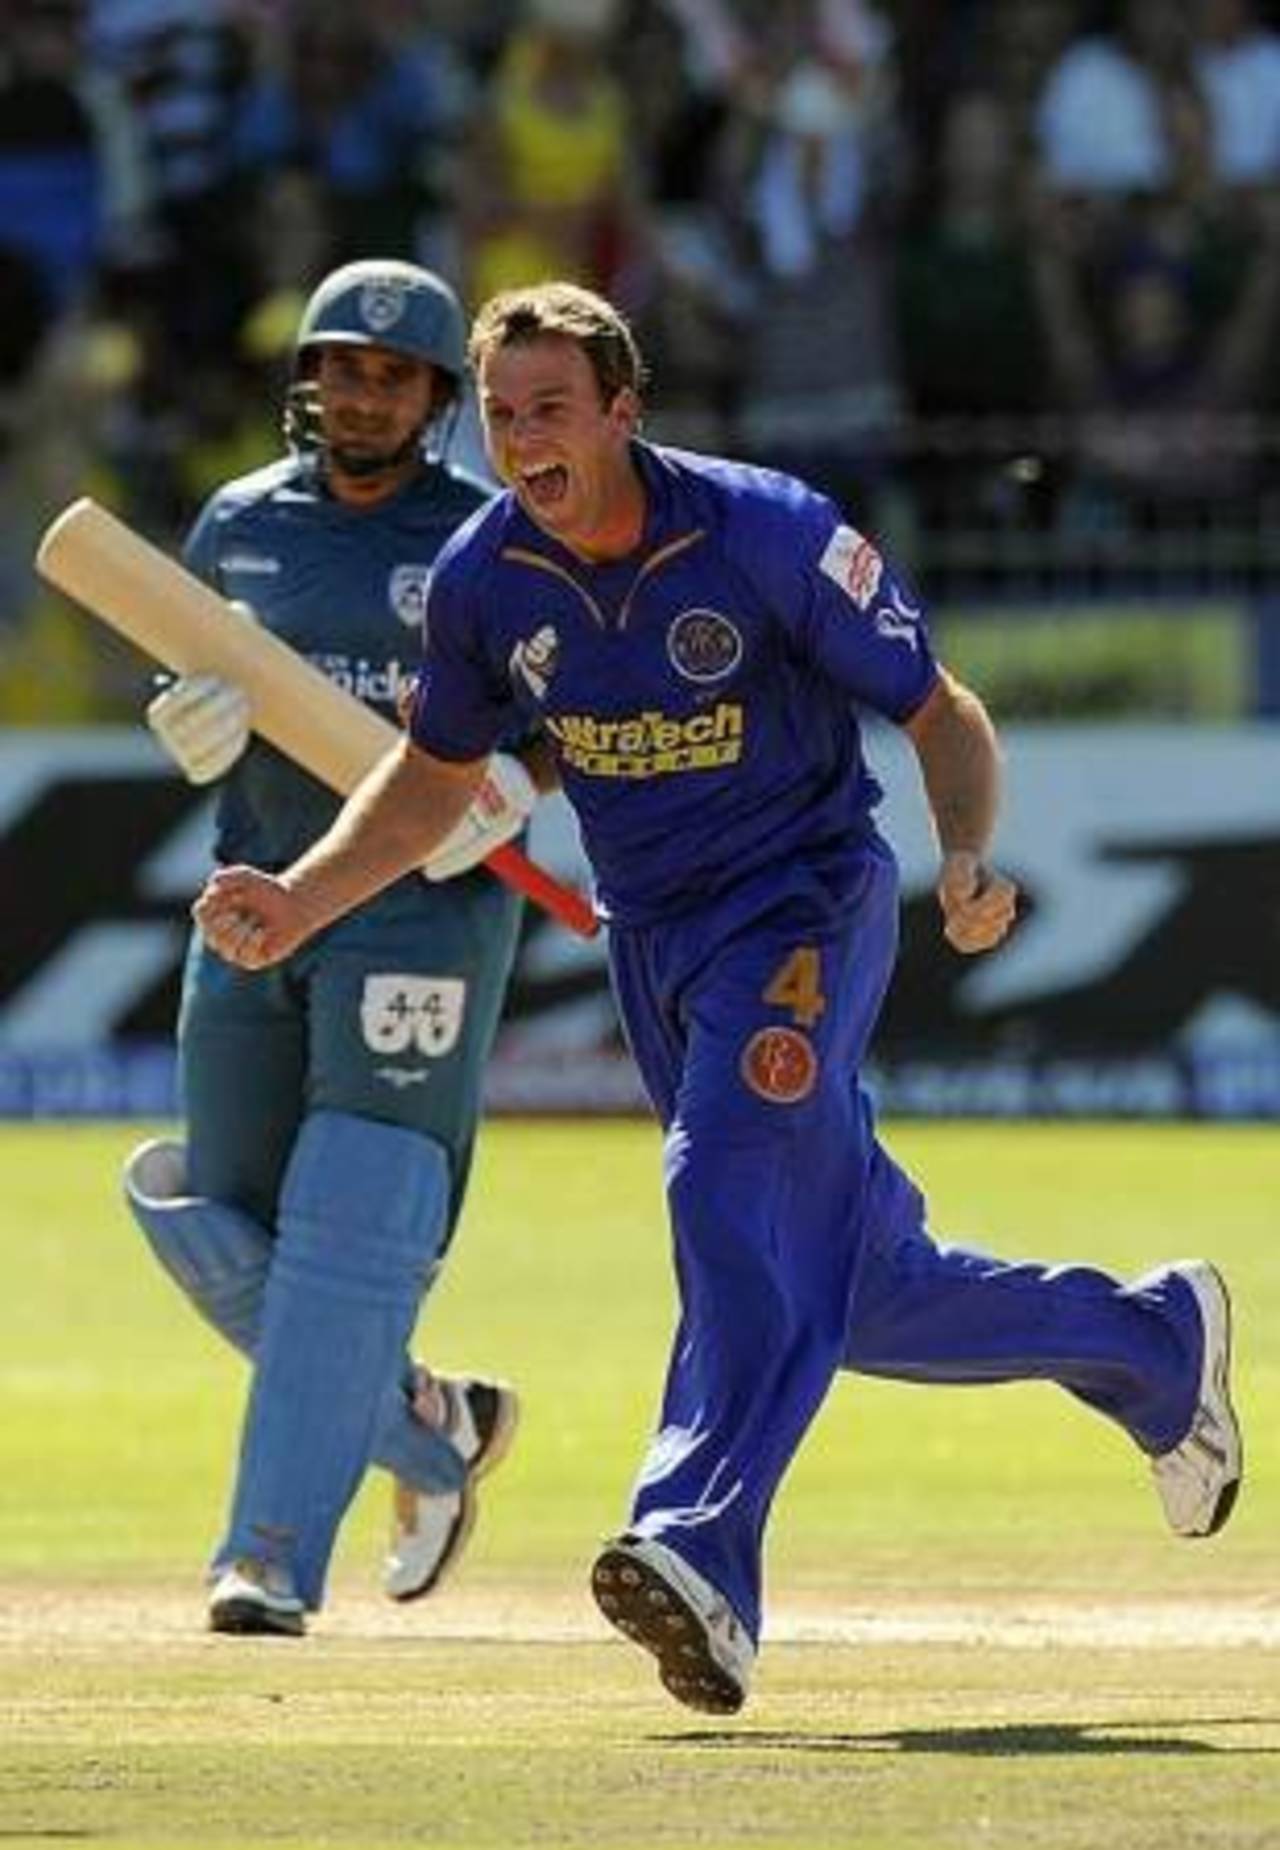 Shane Harwood celebrates a wicket with his first ball in the IPL, Deccan Chargers v Rajasthan Royals, IPL, 25th match, Port Elizabeth, May 2, 2009